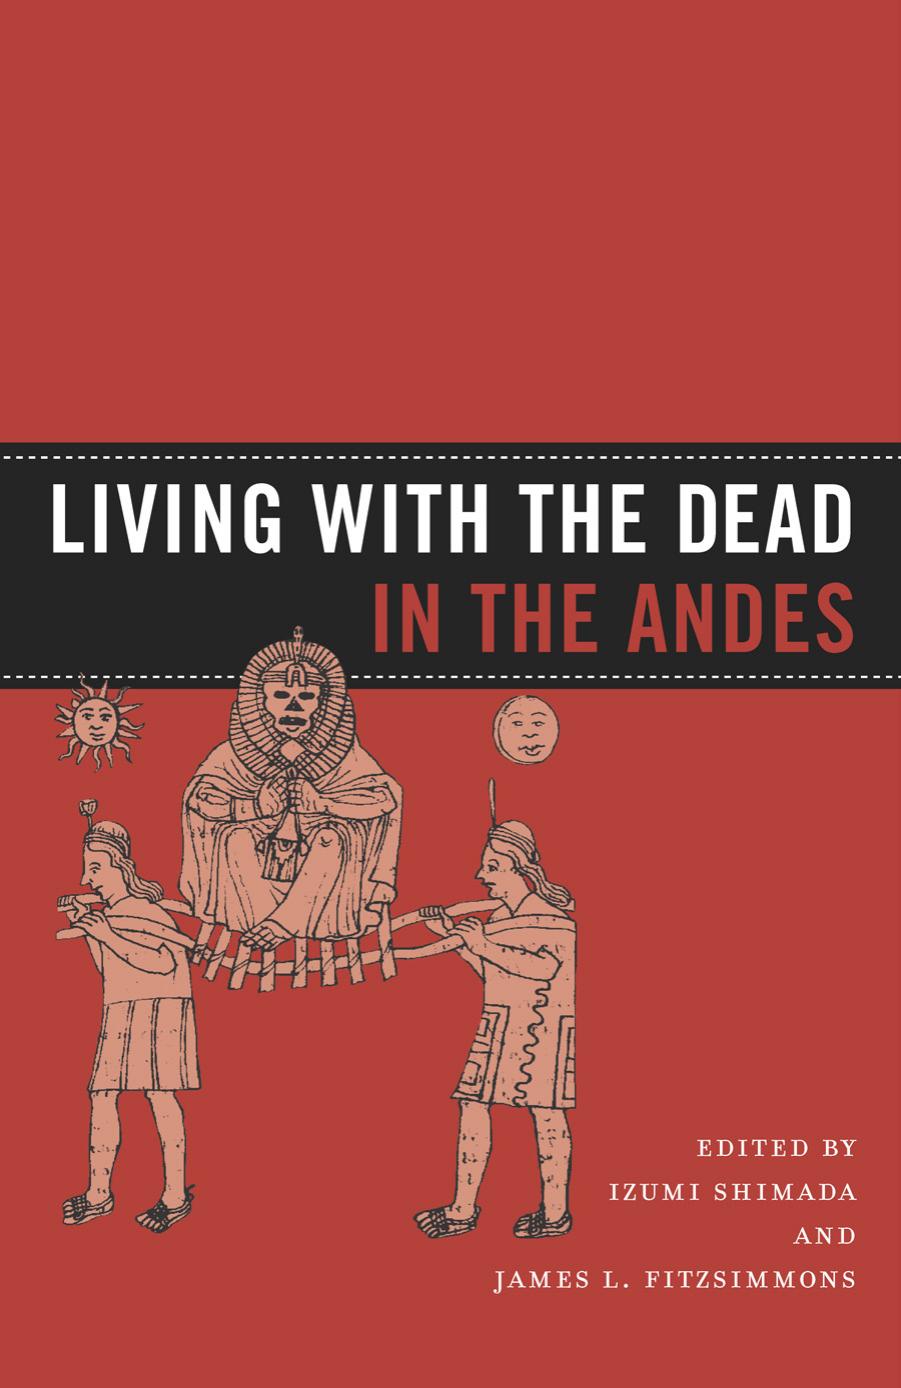 Living with the Dead in the Andes by Izumi Shimada; James L. Fitzsimmons